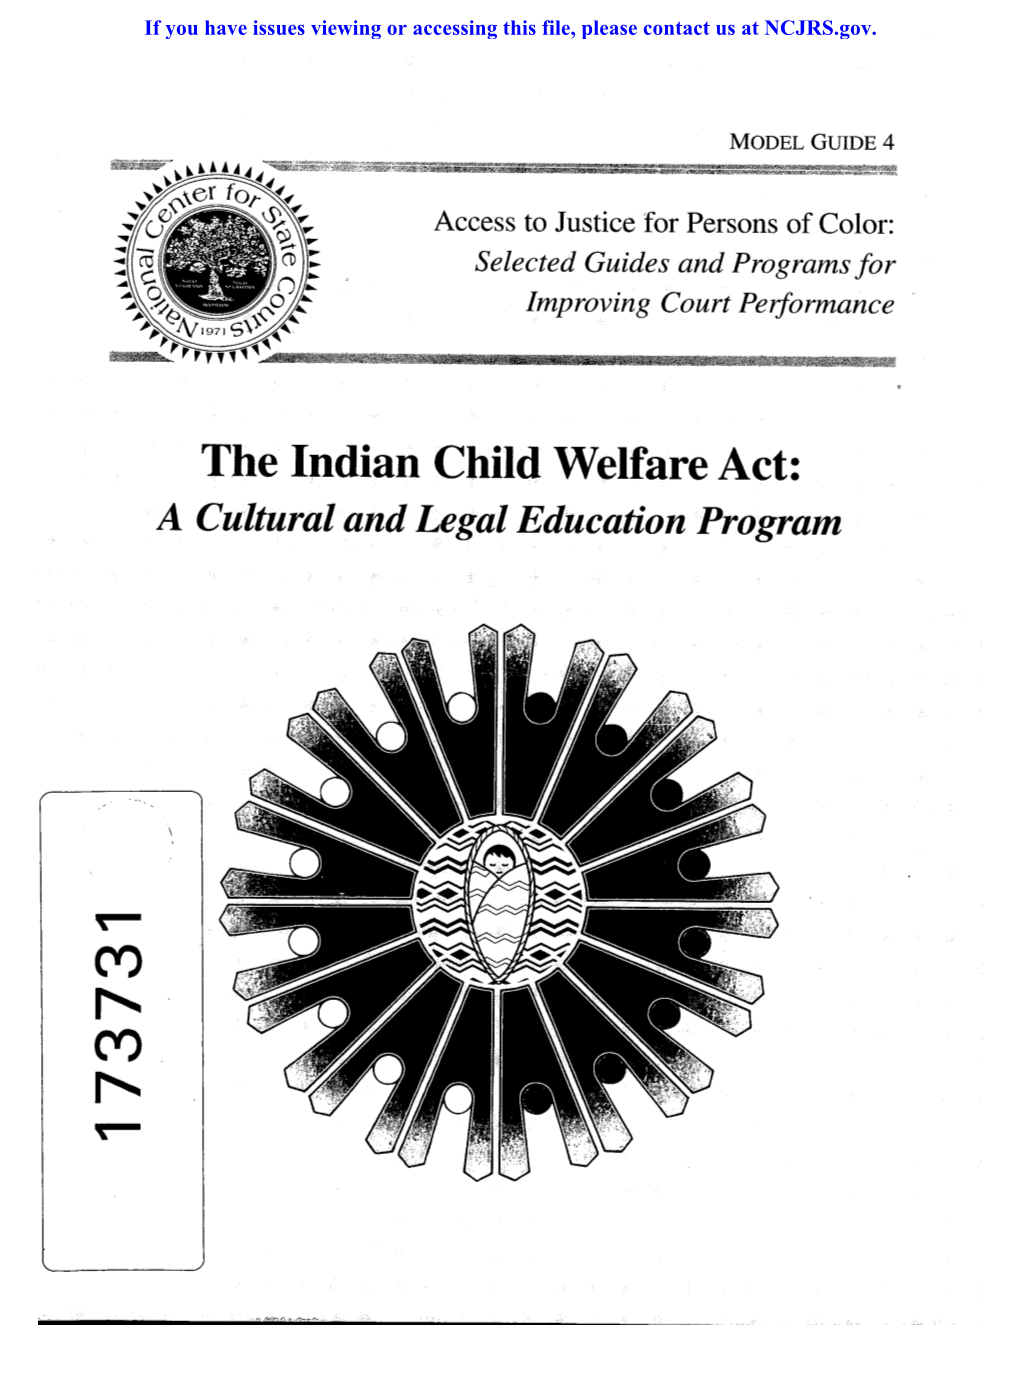 The Indian Child Welfare Act: a Cultural and Legal Education Program